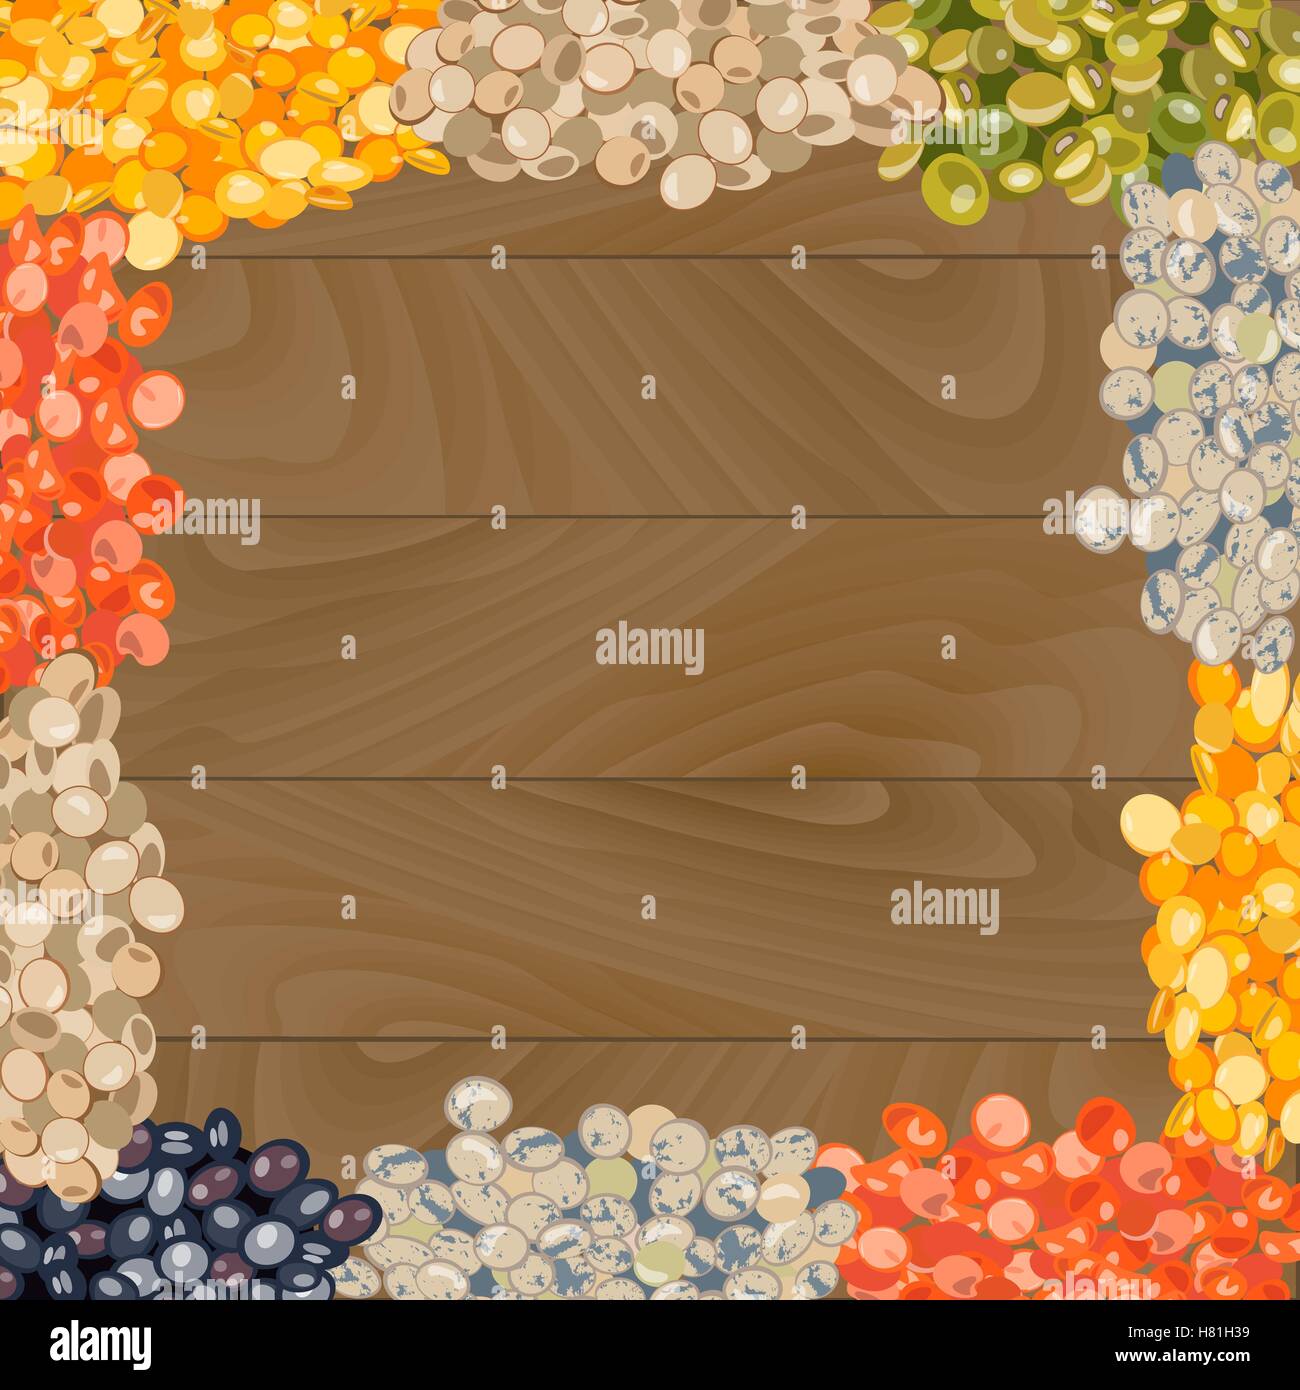 Various types of lentils on wooden background. Yellow, brown, green, red, french green, black lentils. Vector illustration. Stock Vector